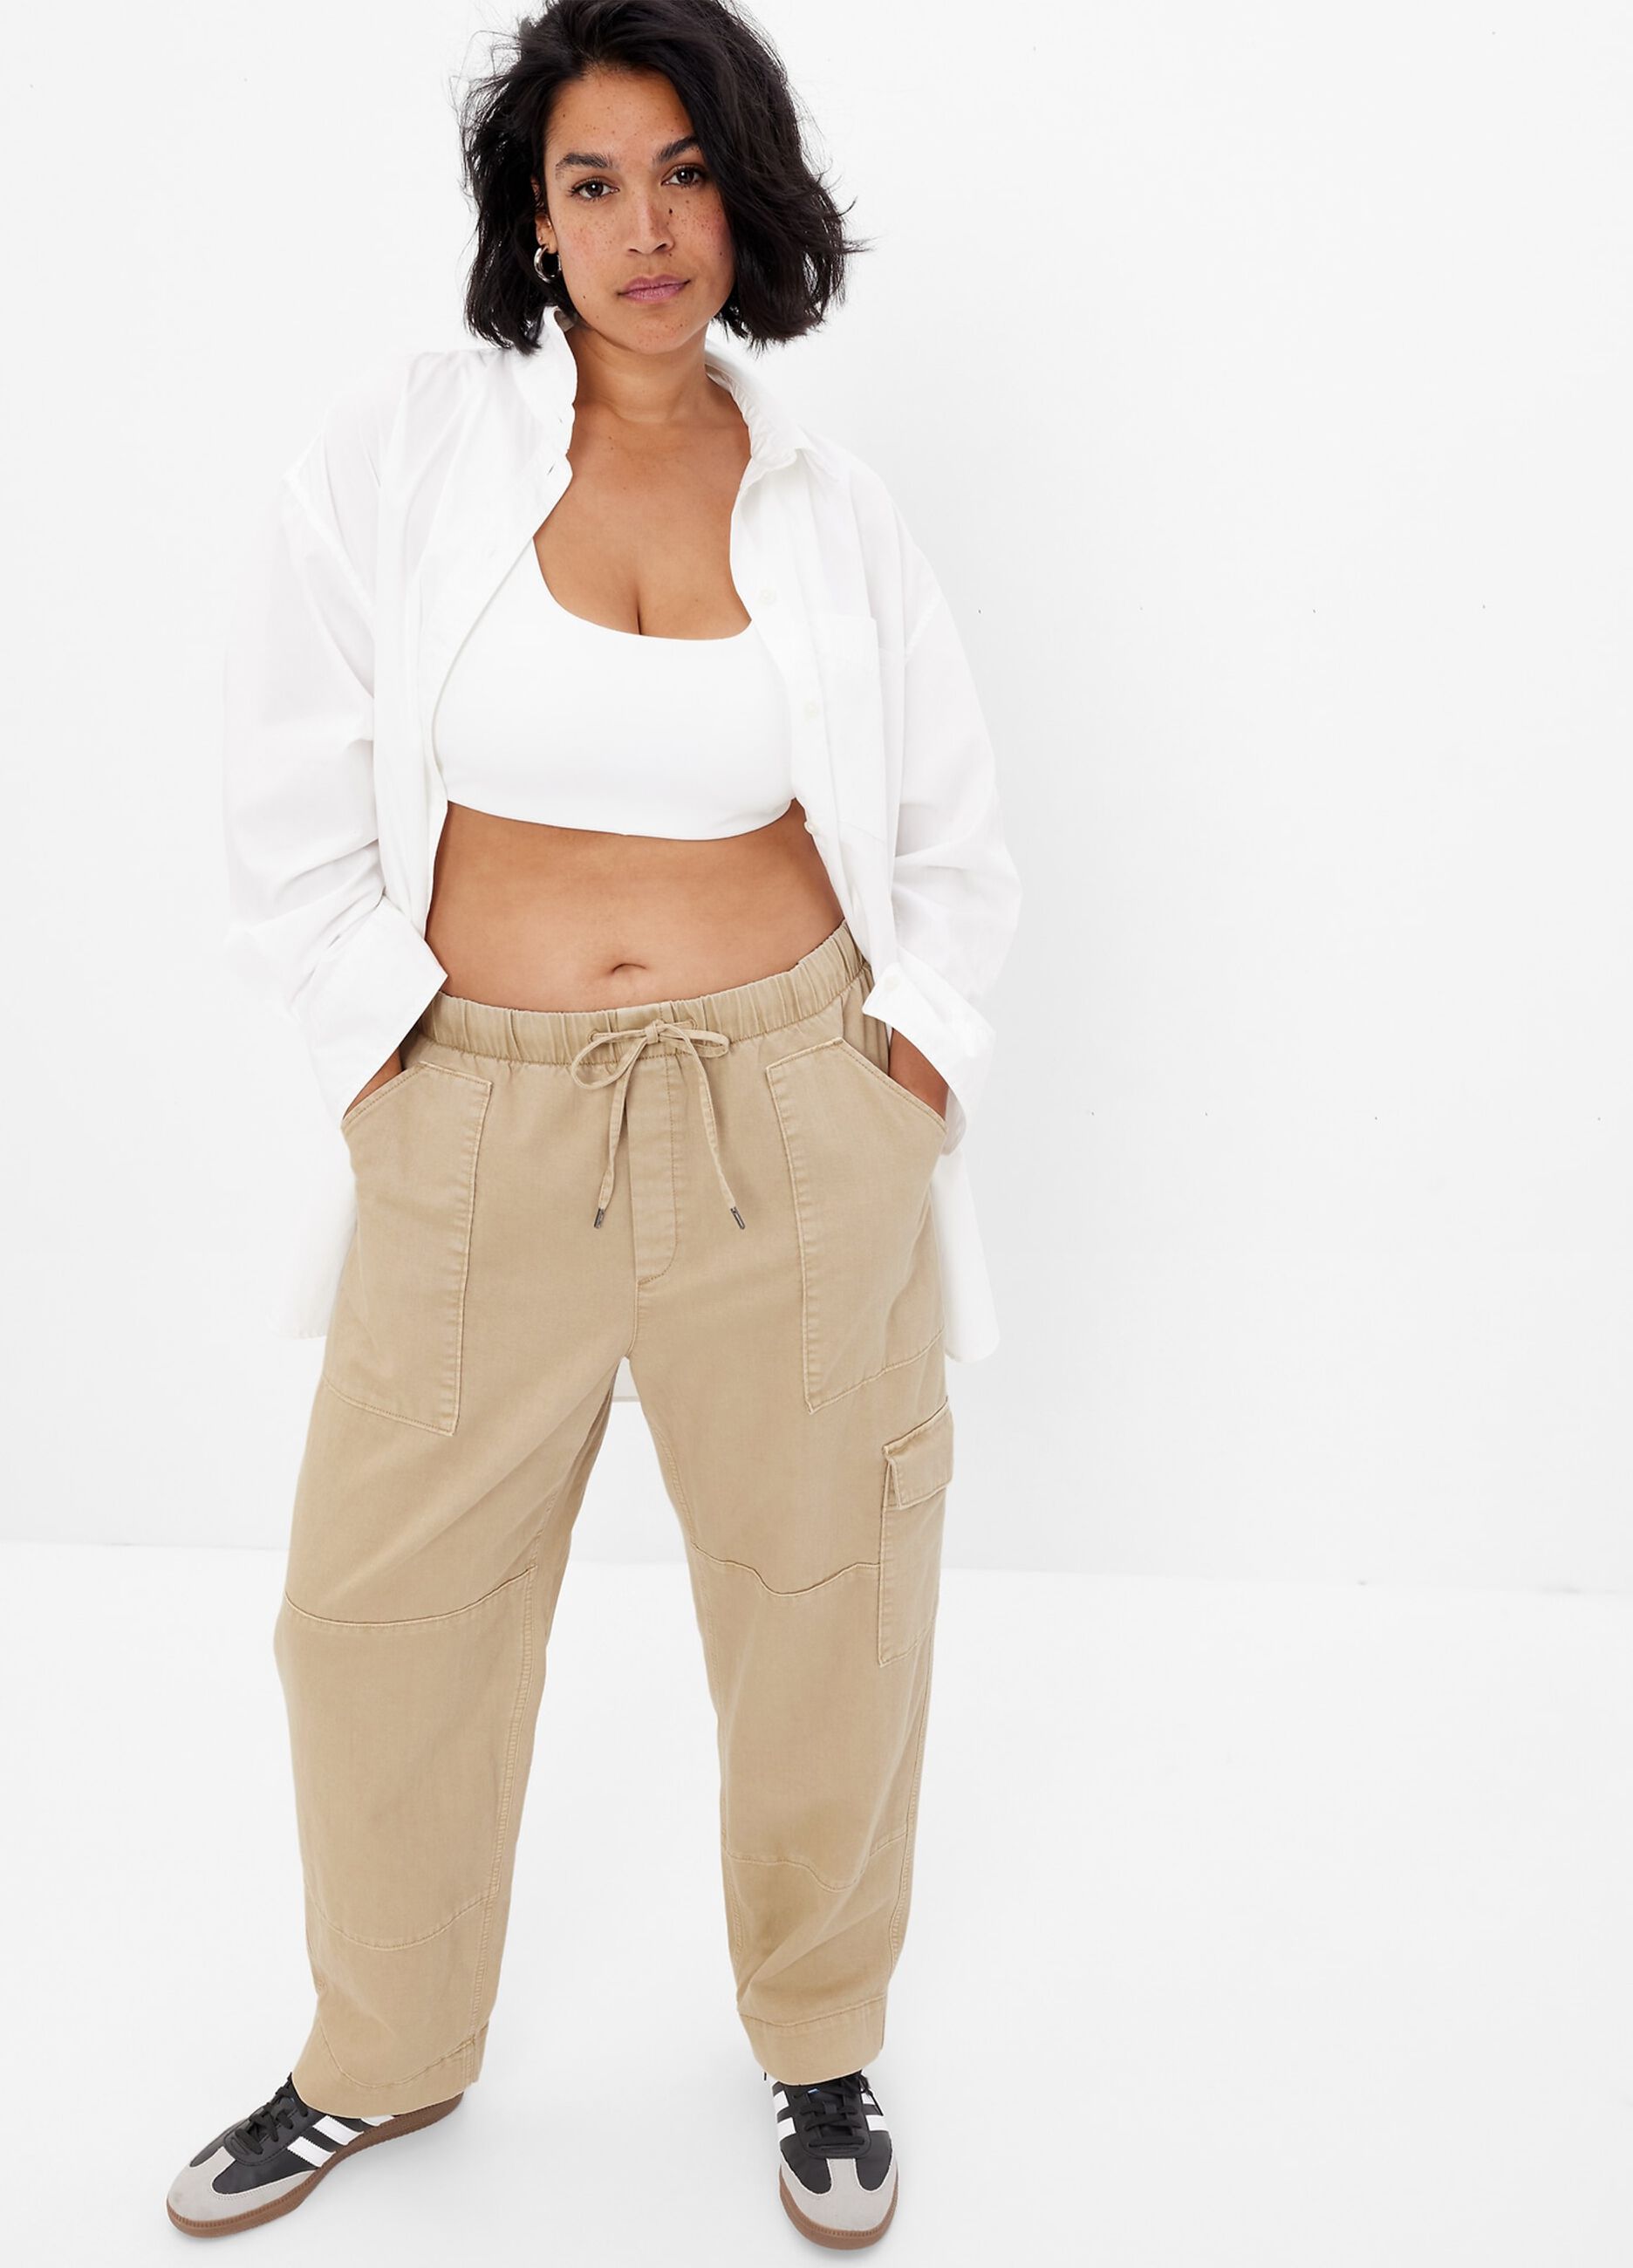 Pull-on utility trousers with drawstring